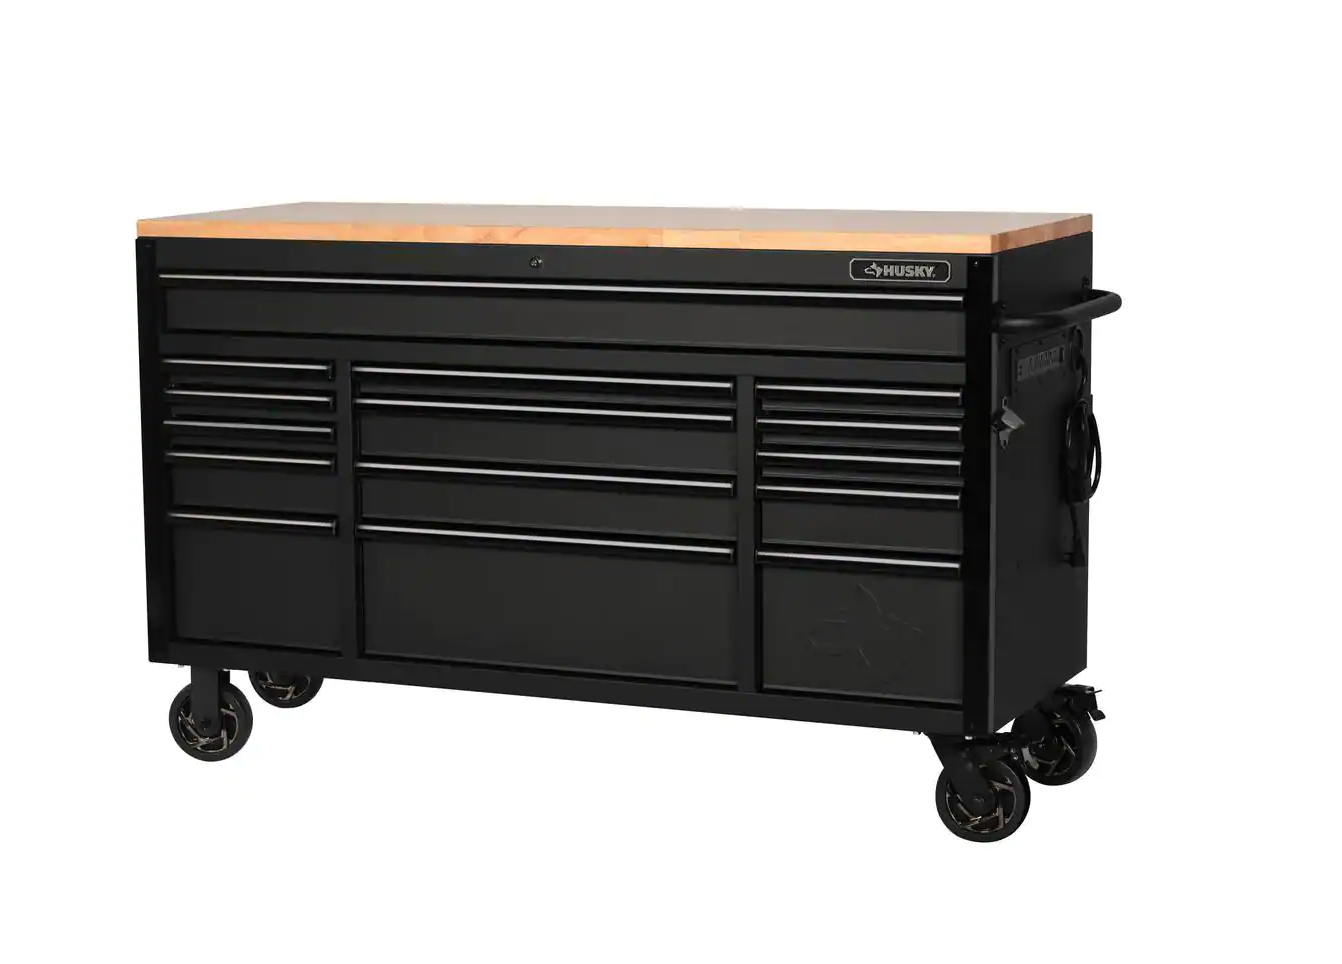 Husky 61 x 23 in. Heavy Duty 15-Drawer Mobile Workbench Tool Chest with Solid Wood Top ($200 off)